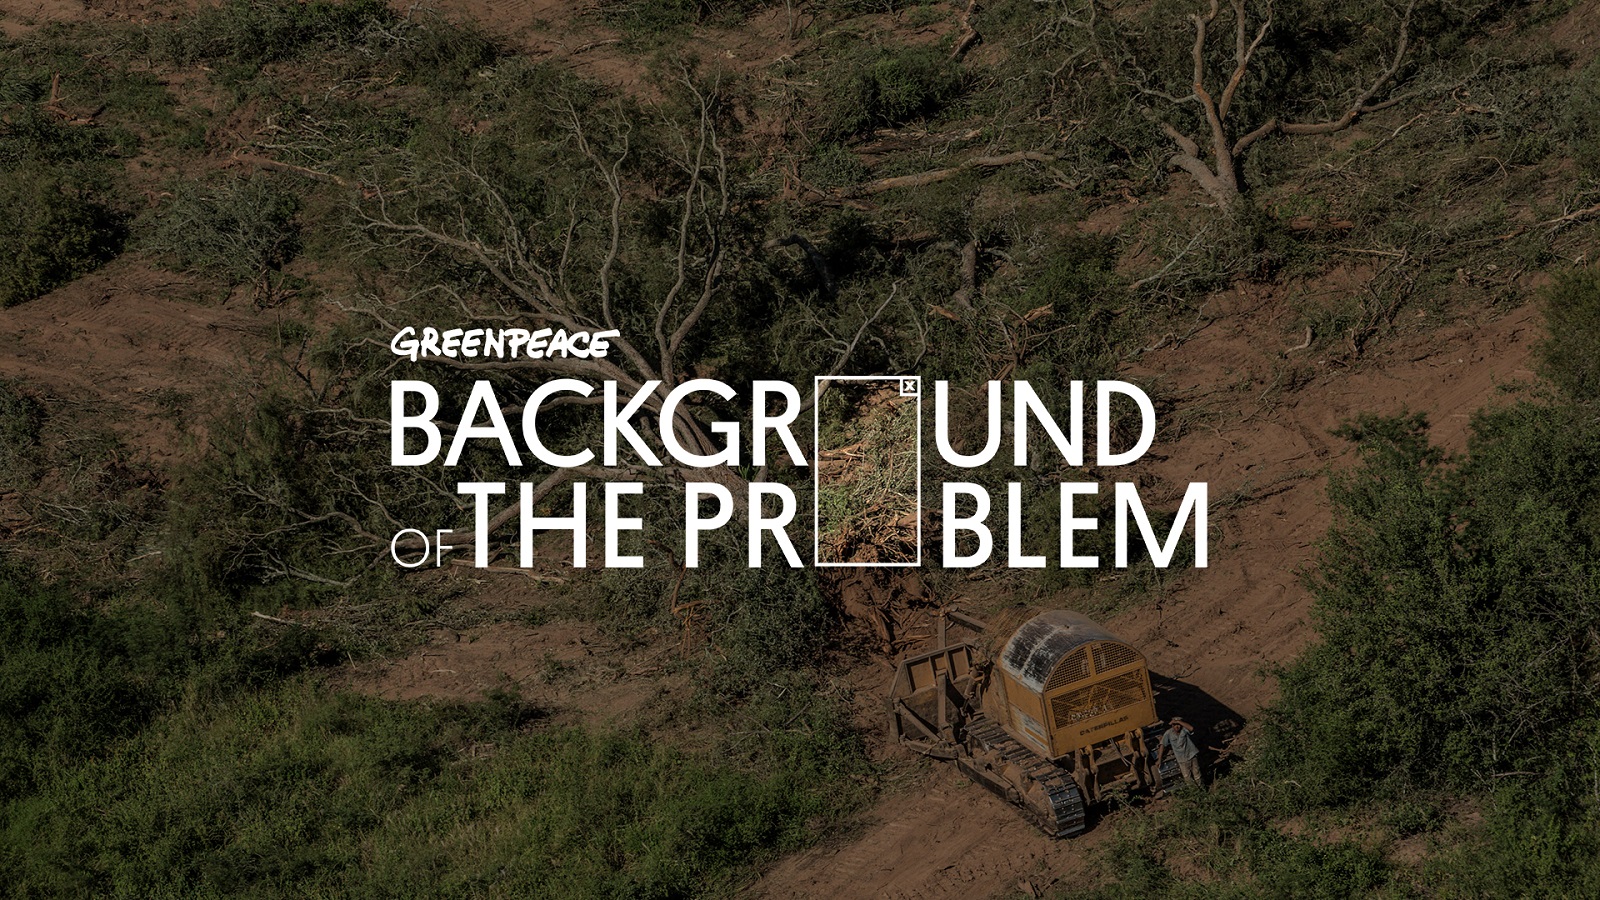 Greenpeace Fights Illegal Logging with New Backgrounds